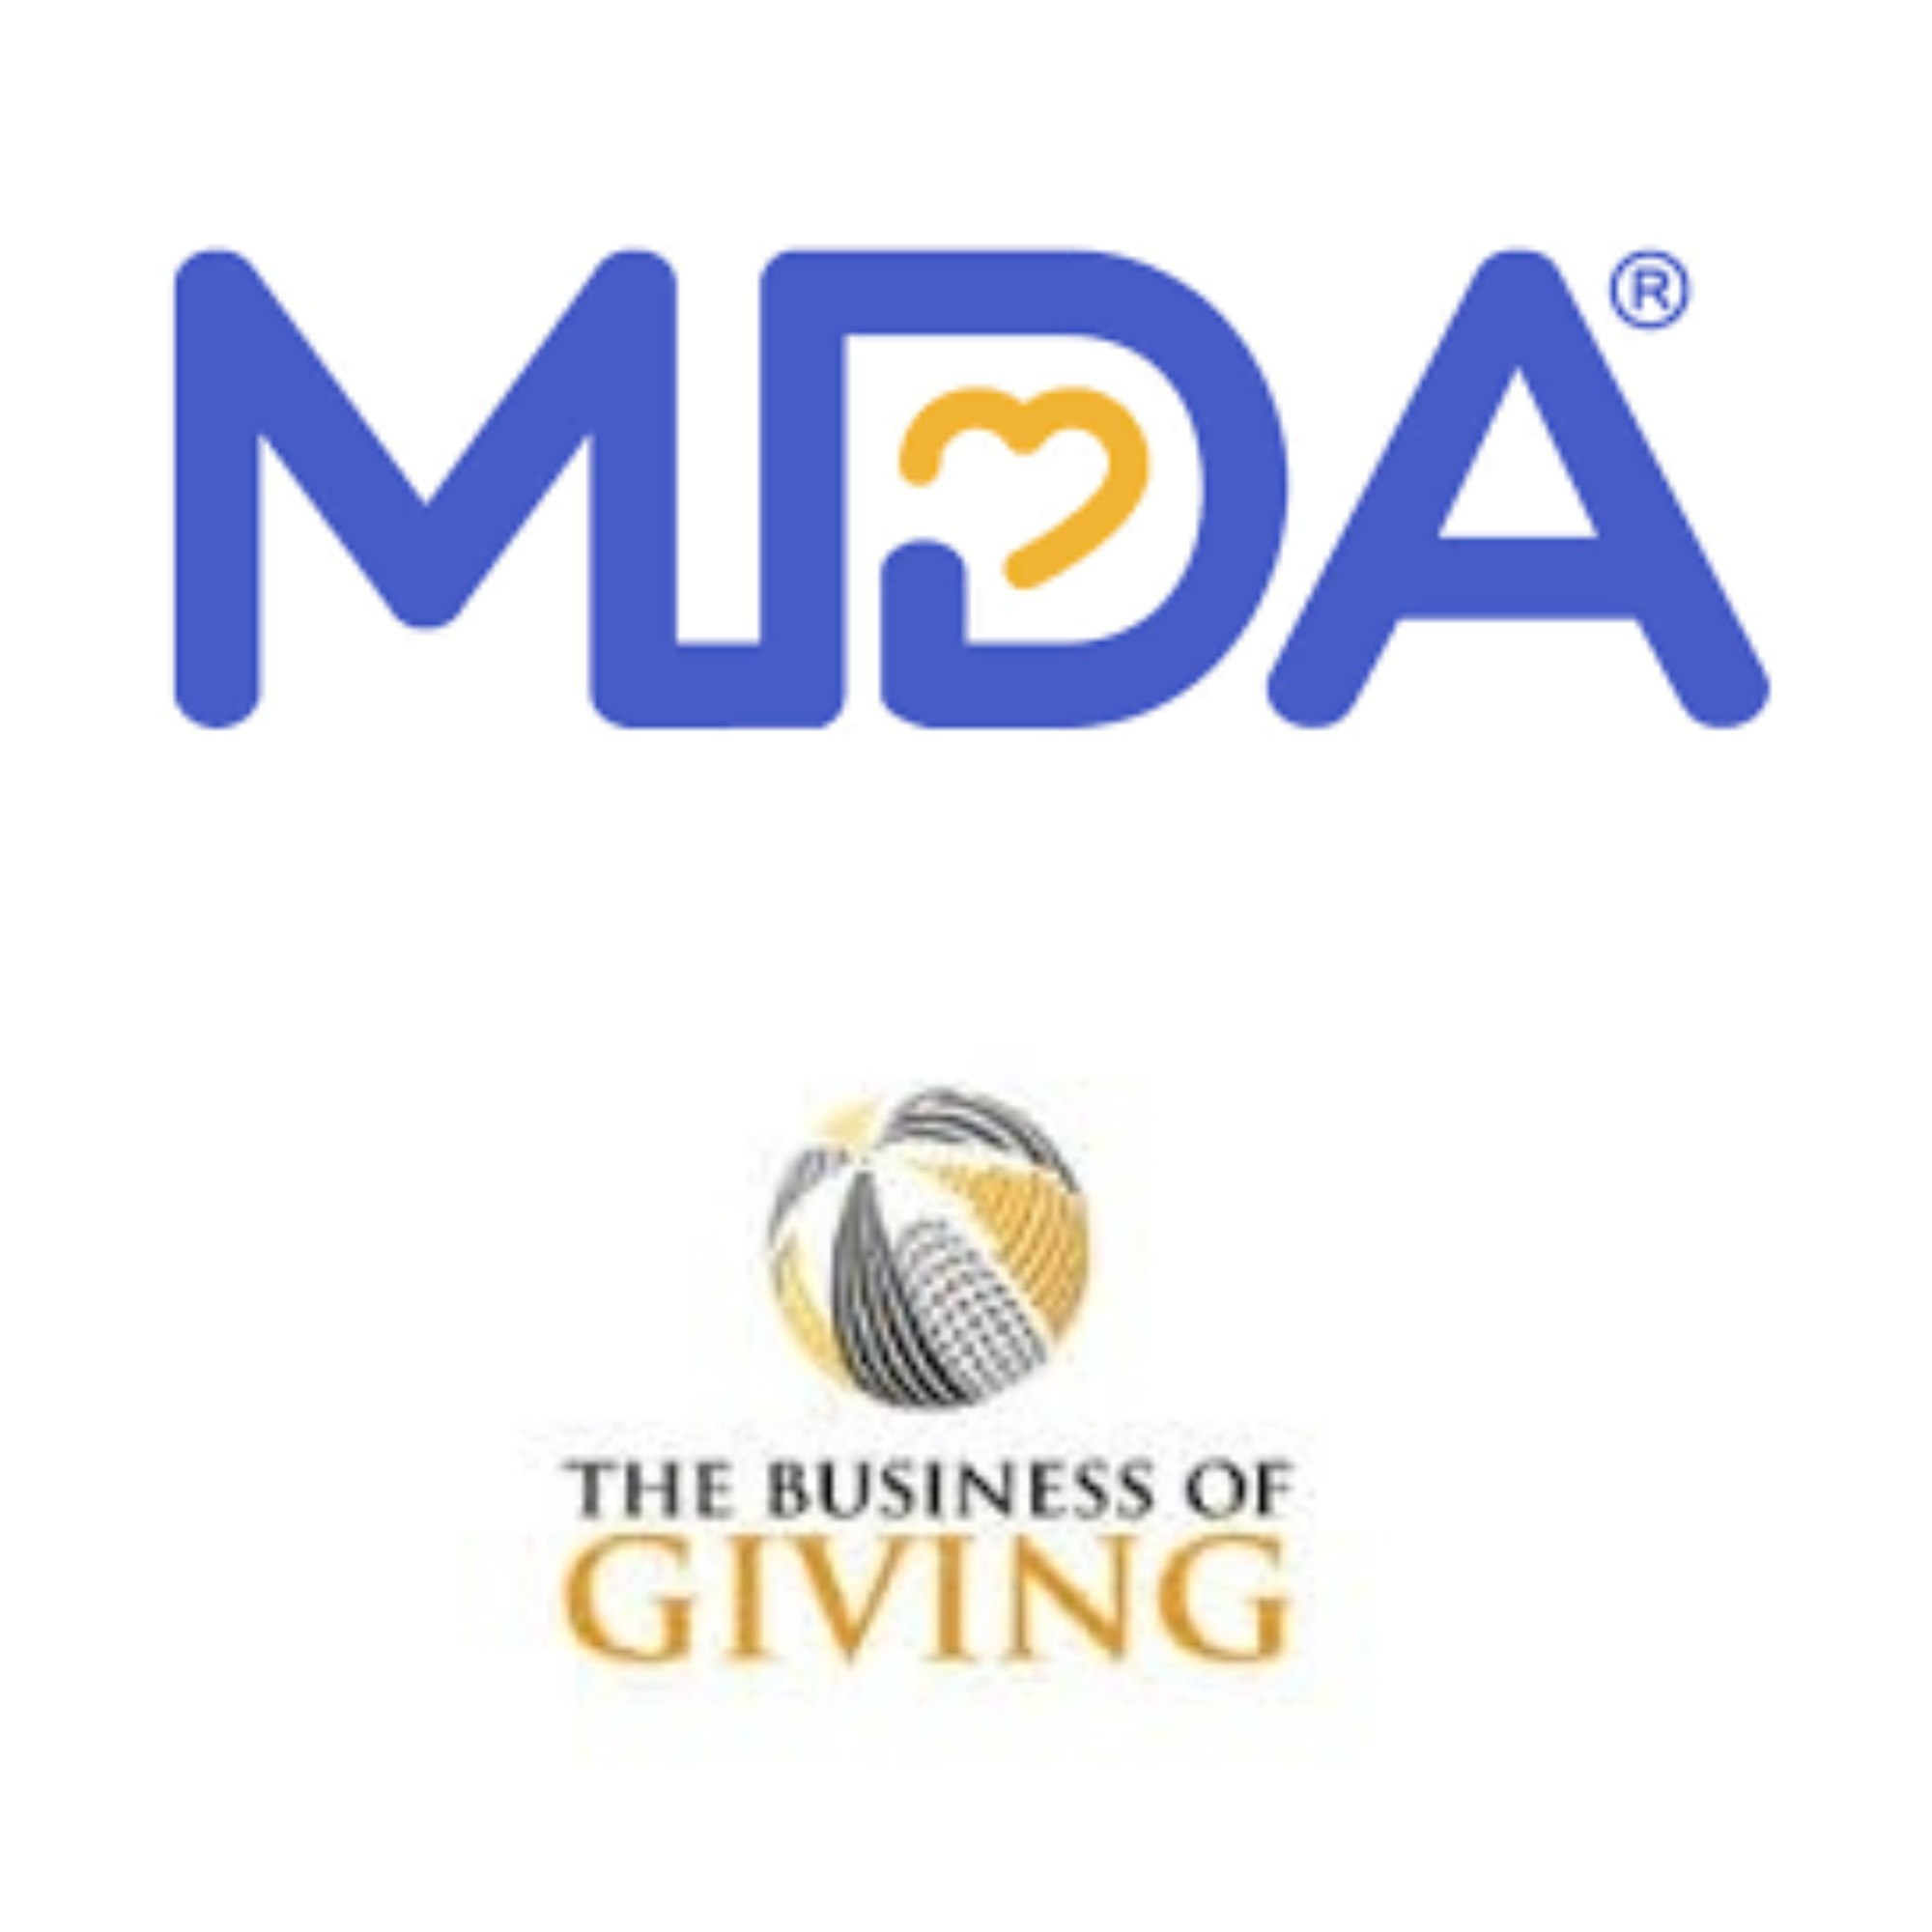 Lynn O’Connor Vos, President & CEO of The Muscular Dystrophy Association